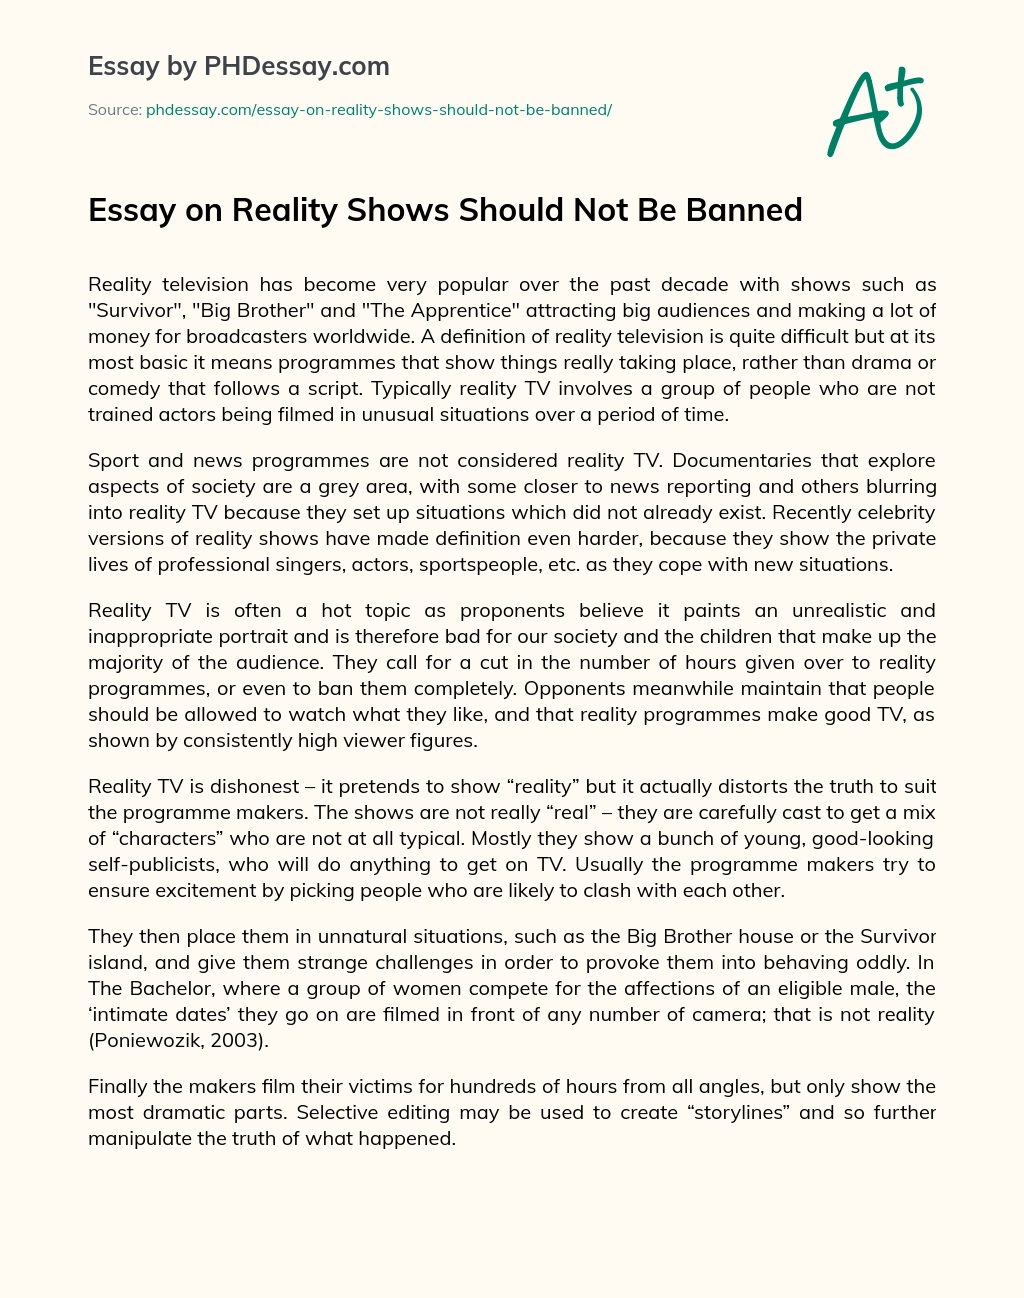 Essay on Reality Shows Should Not Be Banned essay